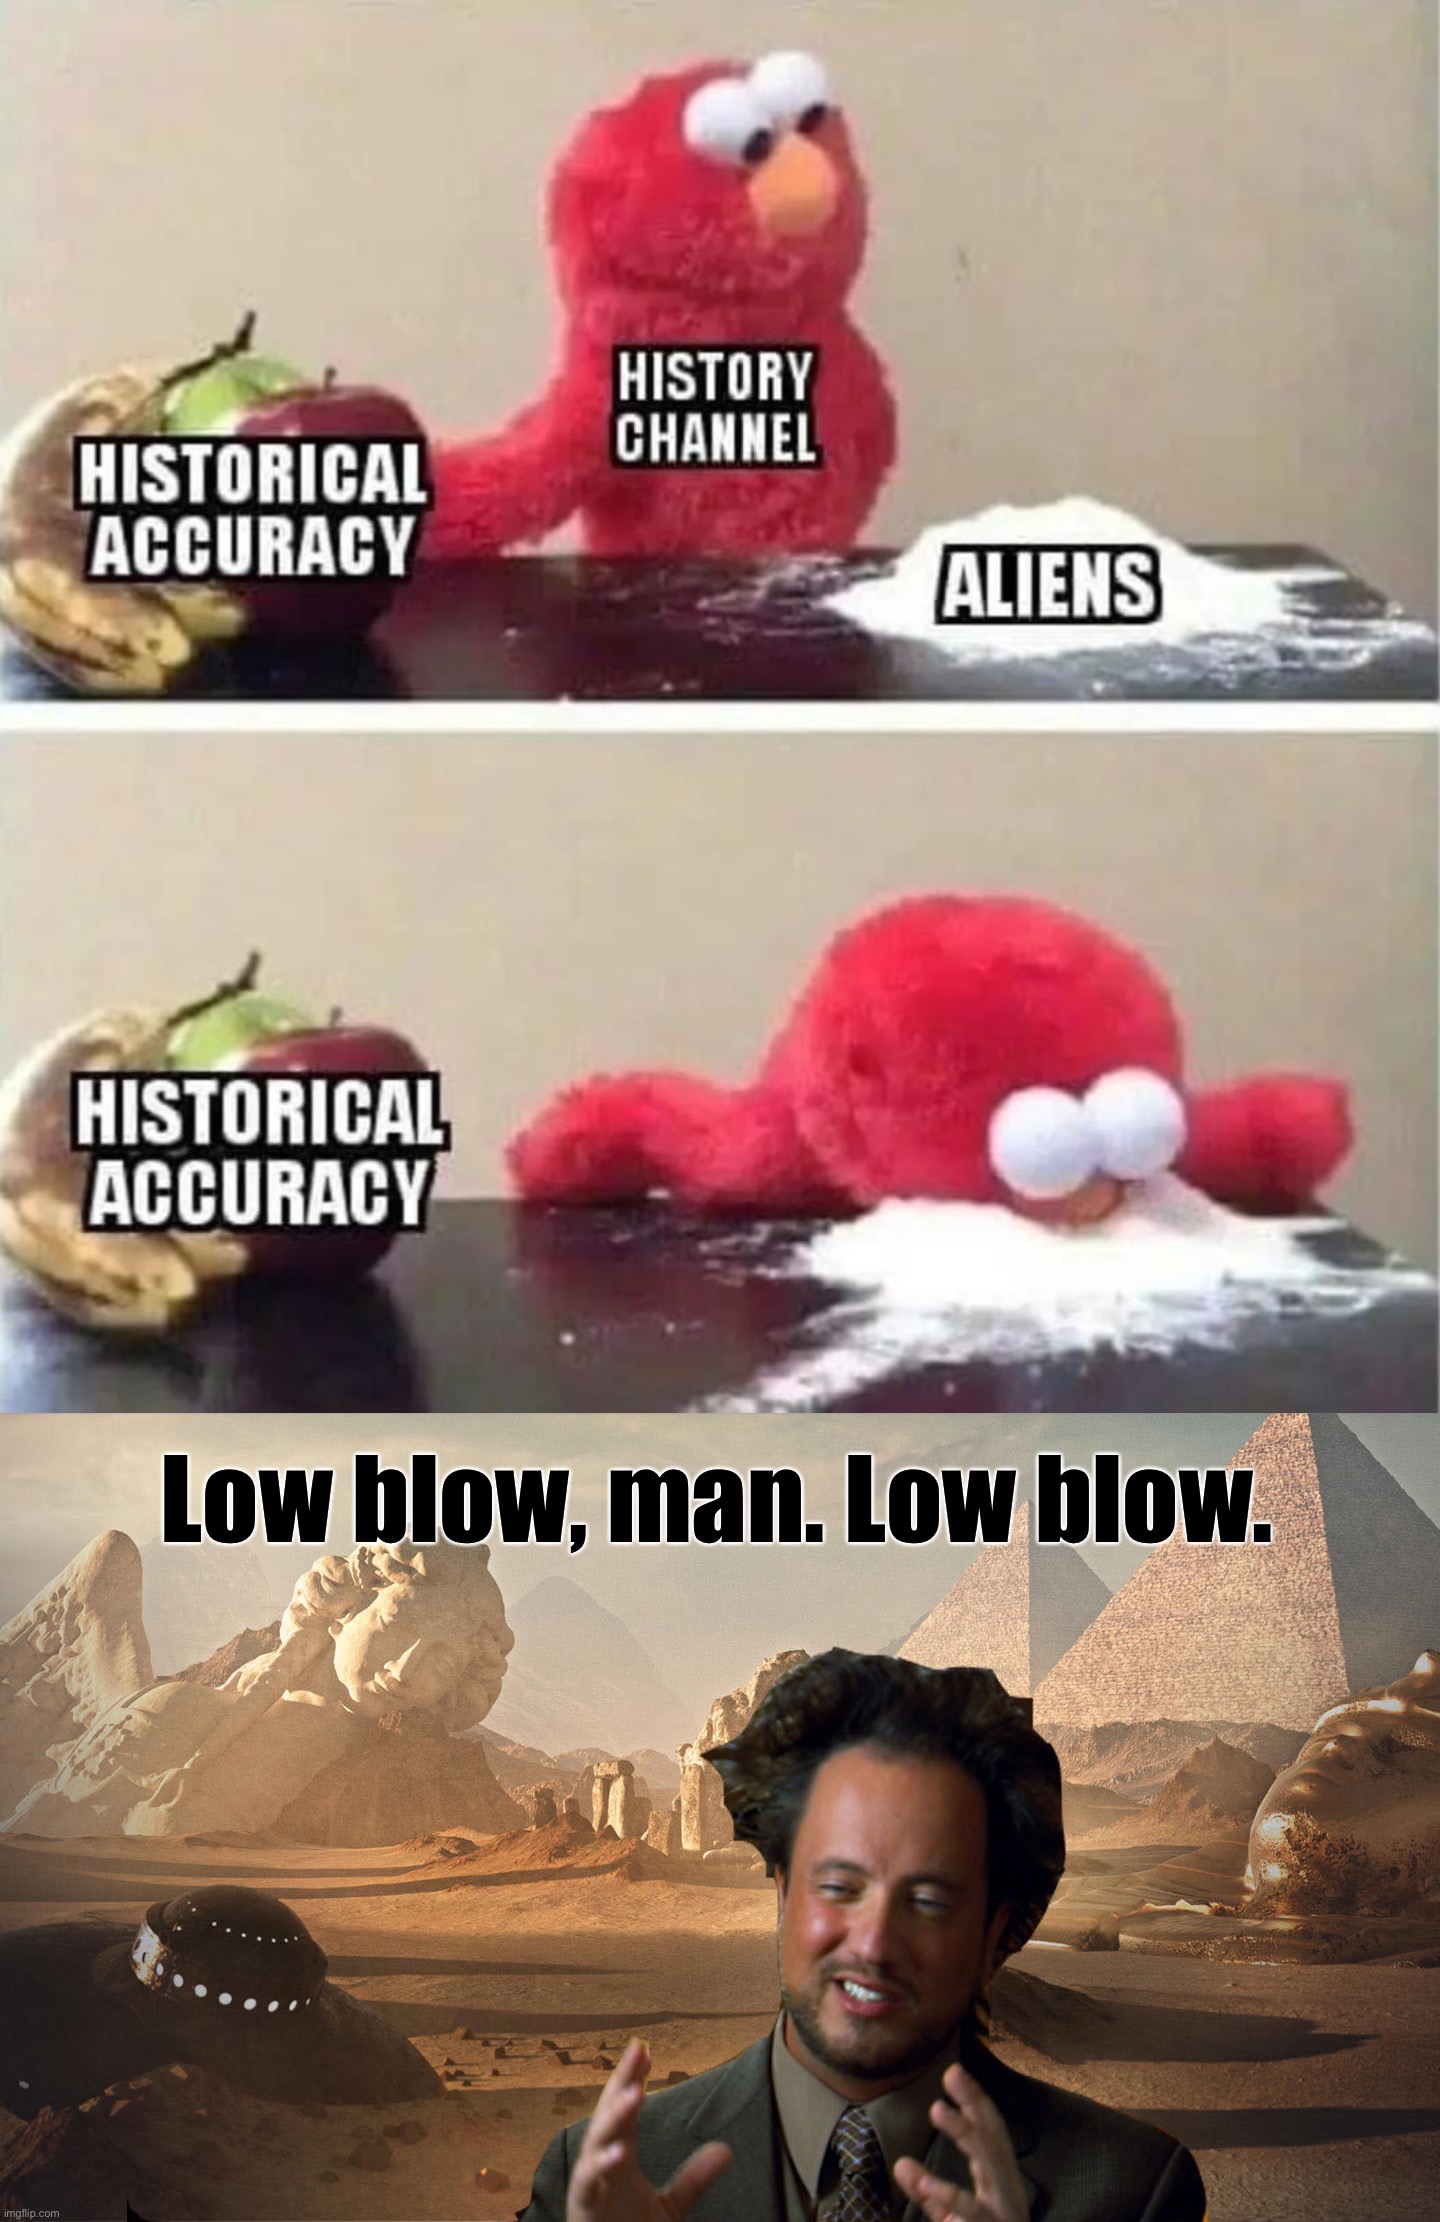 Low blow, man. Low blow. | image tagged in history channel aliens,ancient aliens guy redux | made w/ Imgflip meme maker